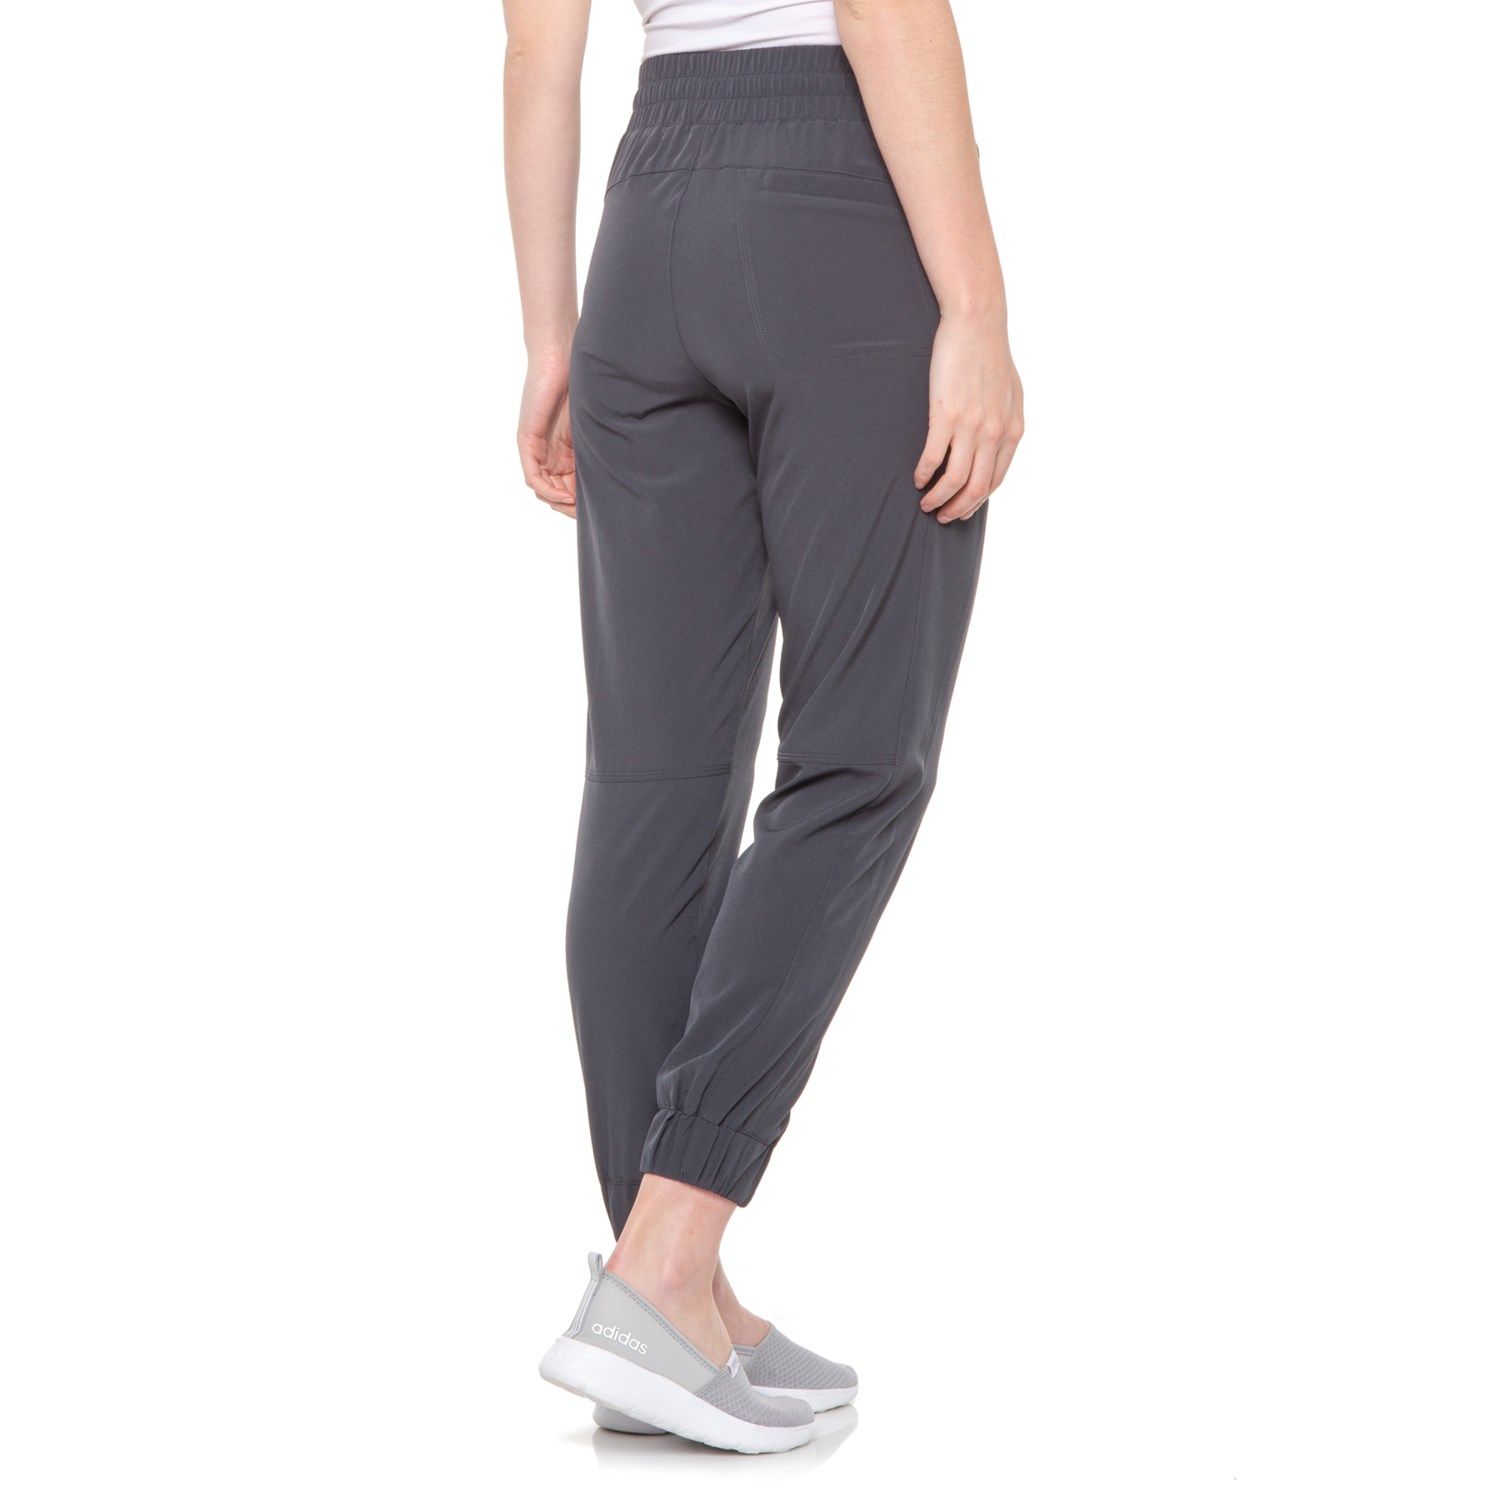 Kyodan Outdoor 4-Way Woven Pants (For Women) - Save 37%